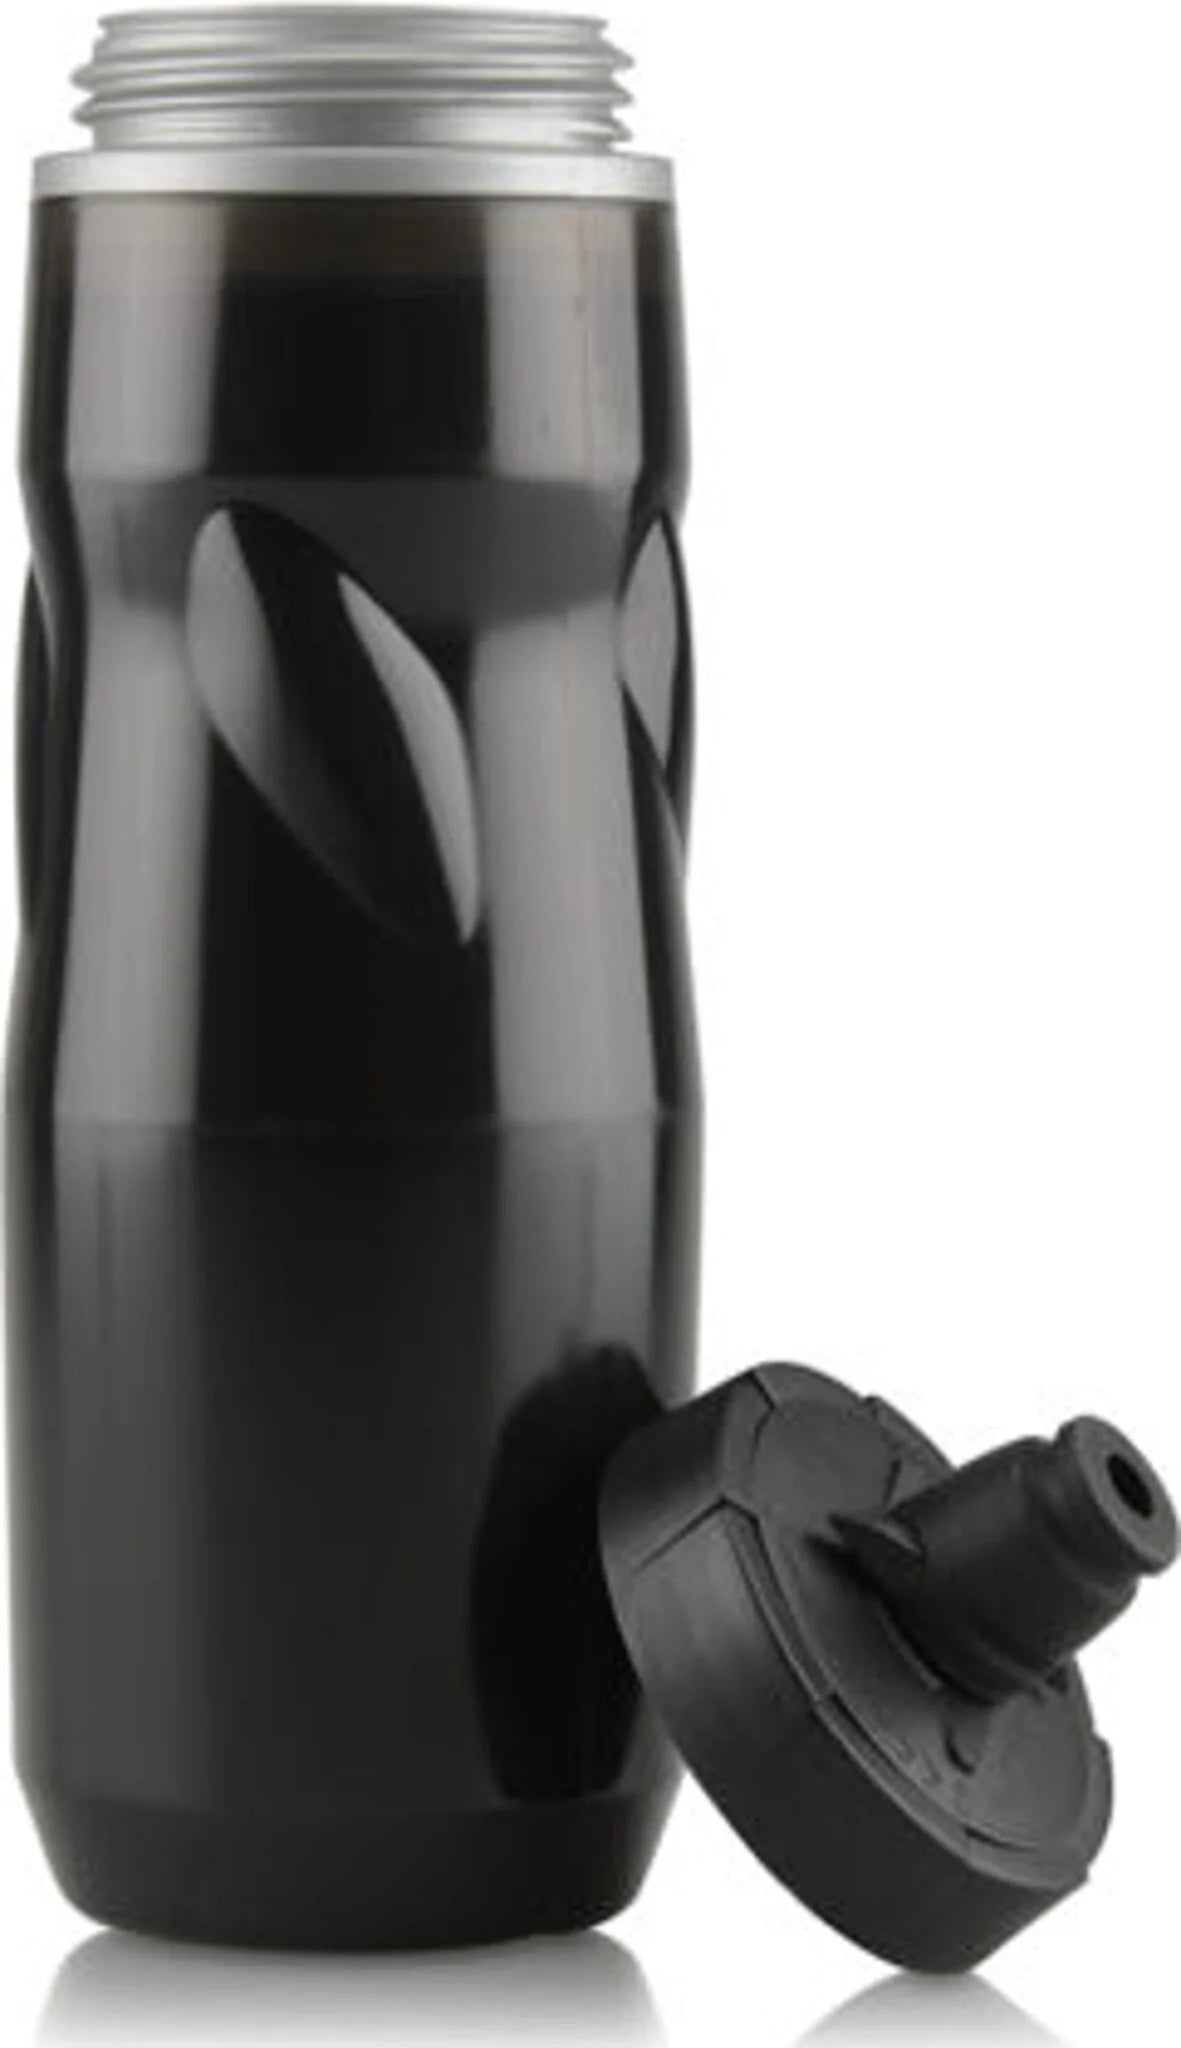 LS INSULATED BOTTLE 20 OZ